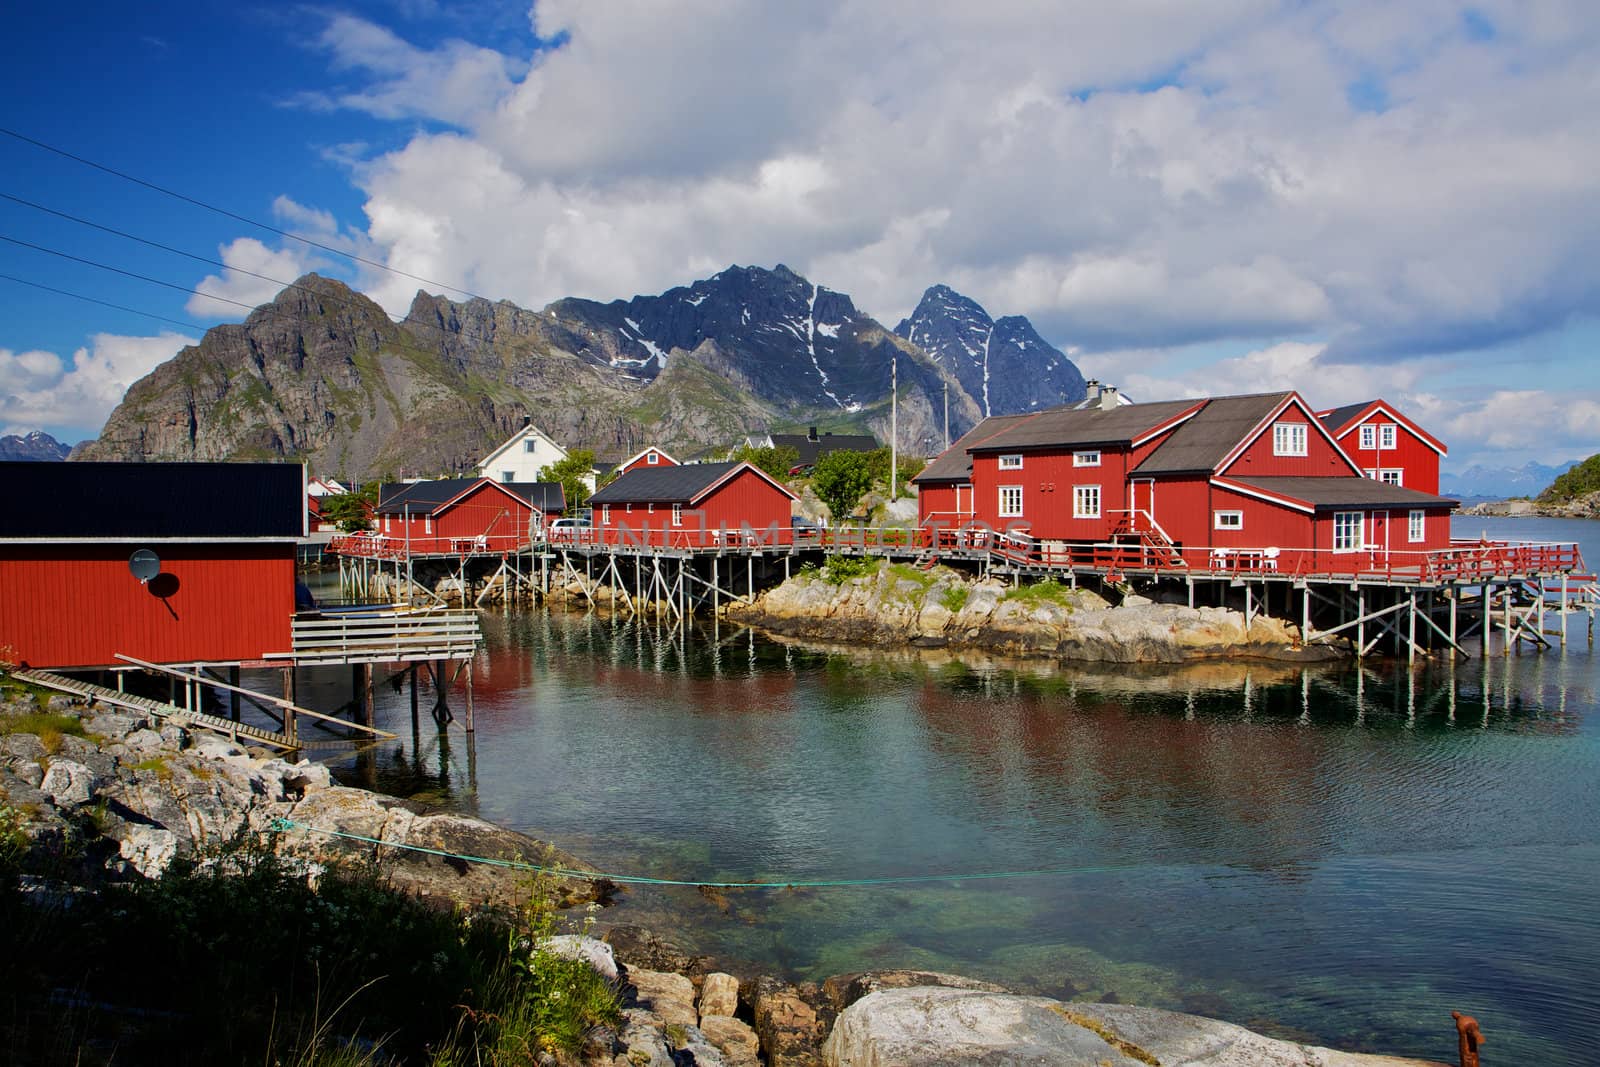 Typical red fishing huts called Rorbu on Lofoten islands in Norway